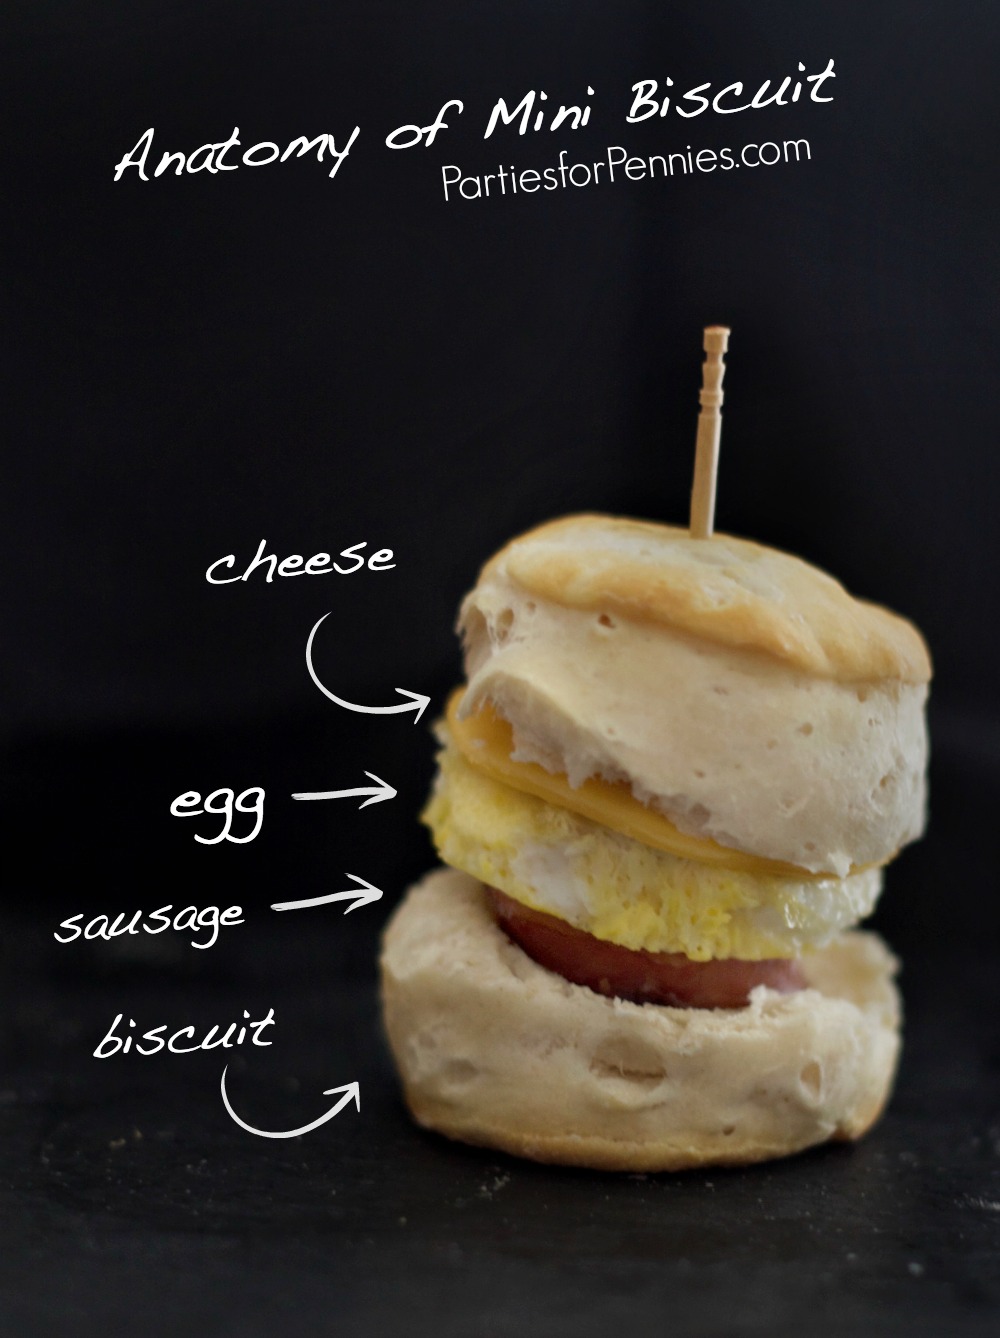 Mini Sausage Egg Cheese Biscuit Appetizer Recipe | PartiesforPennies.com | Anatomy of Biscuit, Recipe, Breakfast, Brunch, easy appetizer